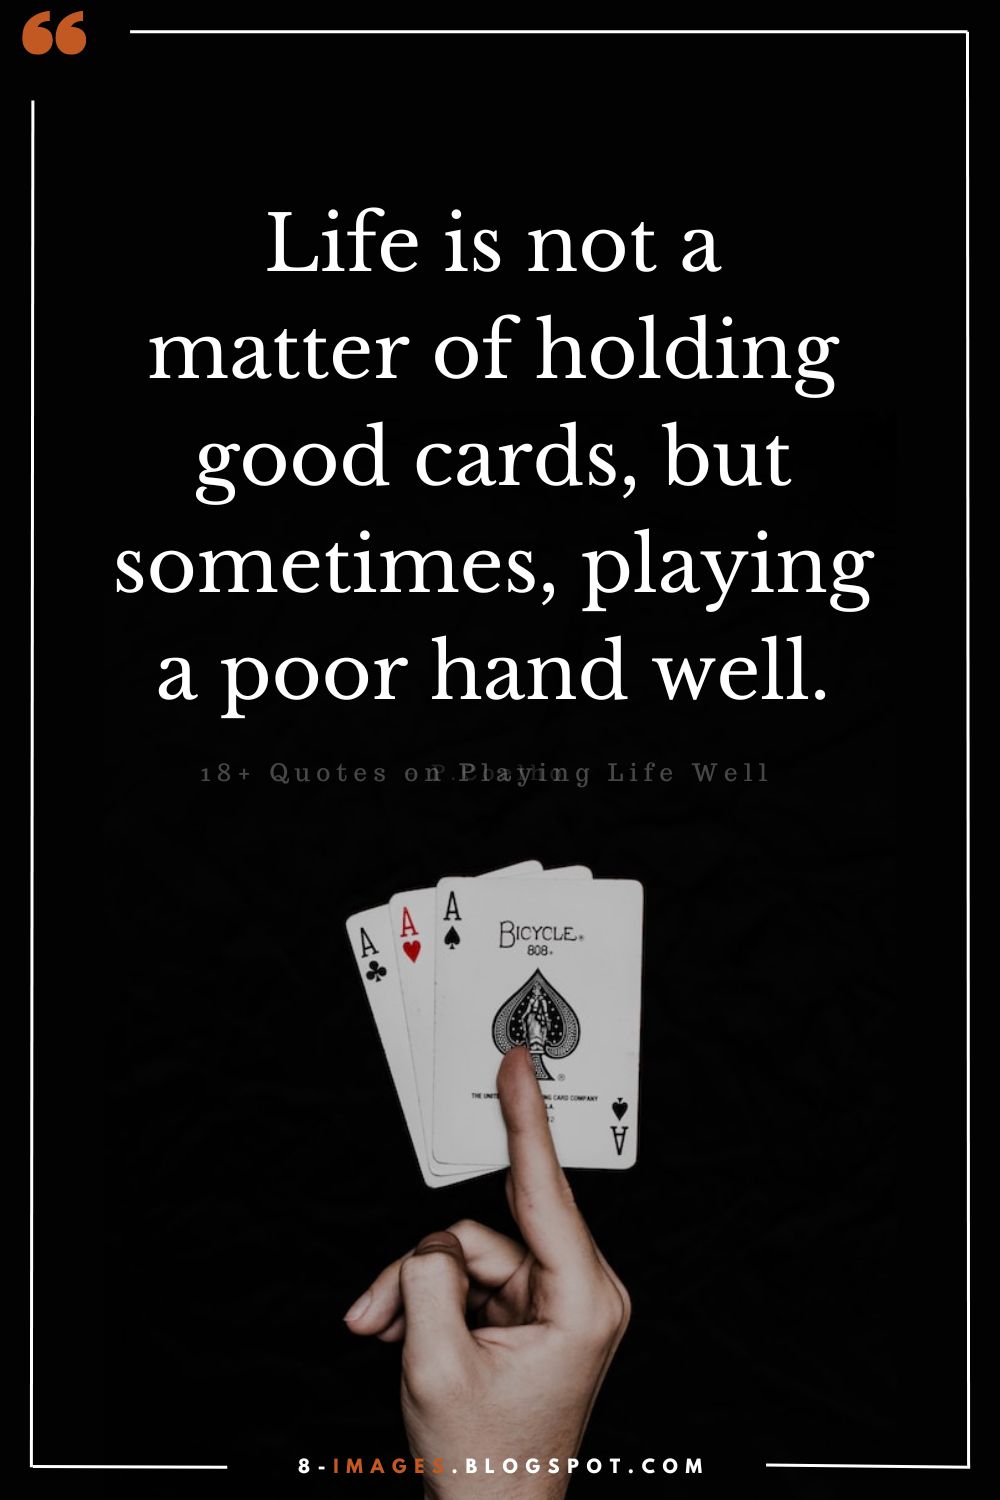 Life Is Not A Matter Of Holding Good Cards, But Sometimes, Playing A Poor Hand Well.